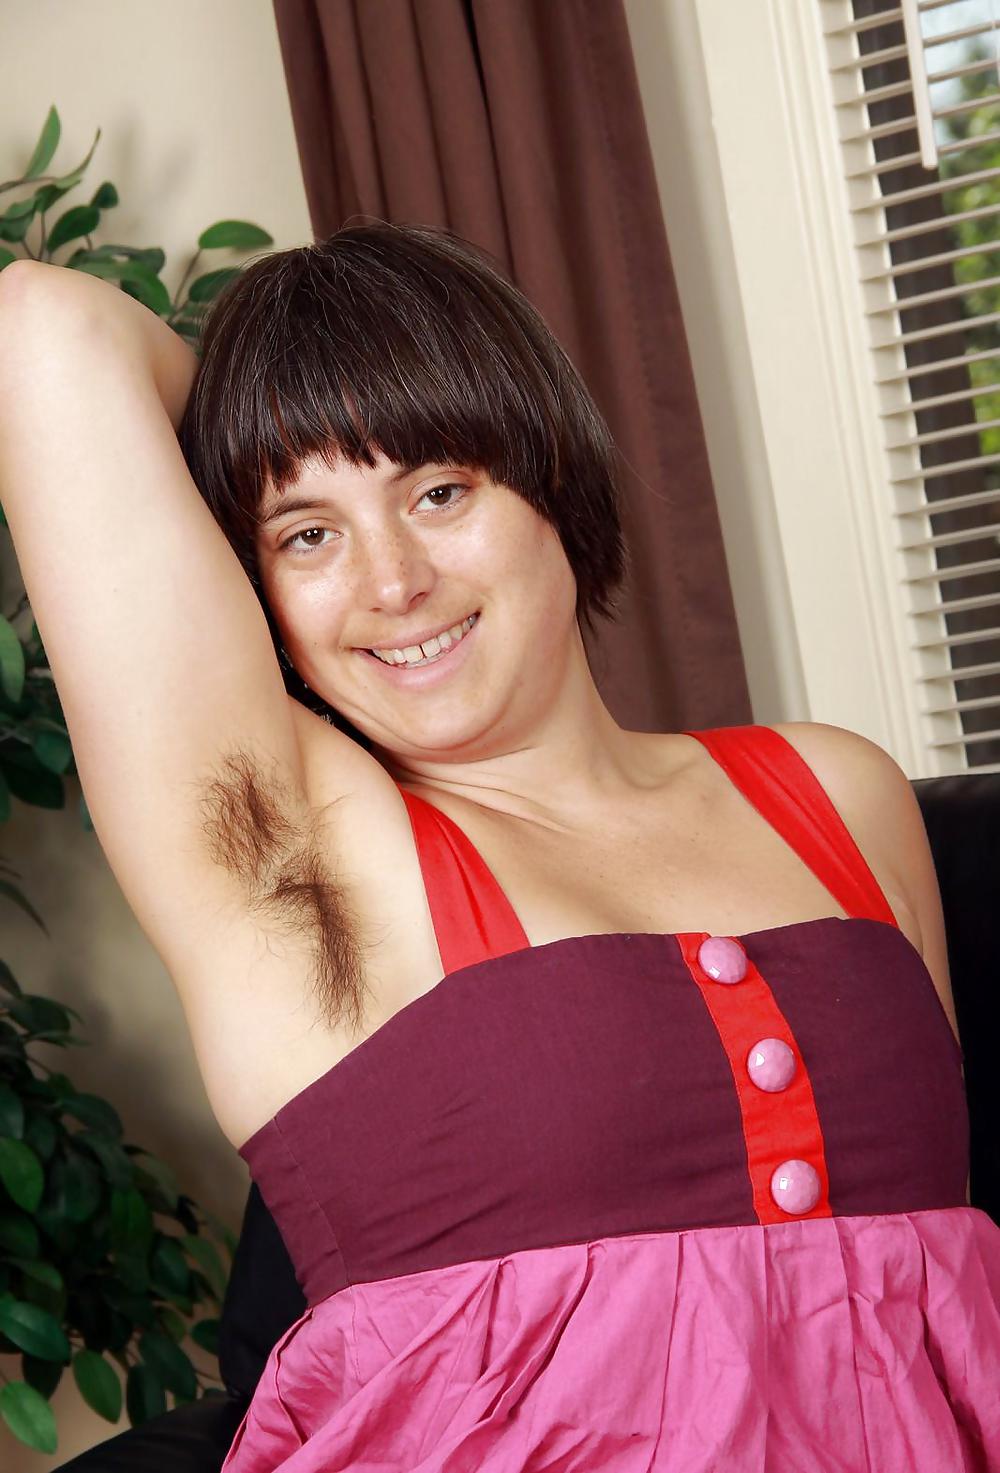 Miscellaneous girls showing hairy, unshaven armpits 1 #36224949